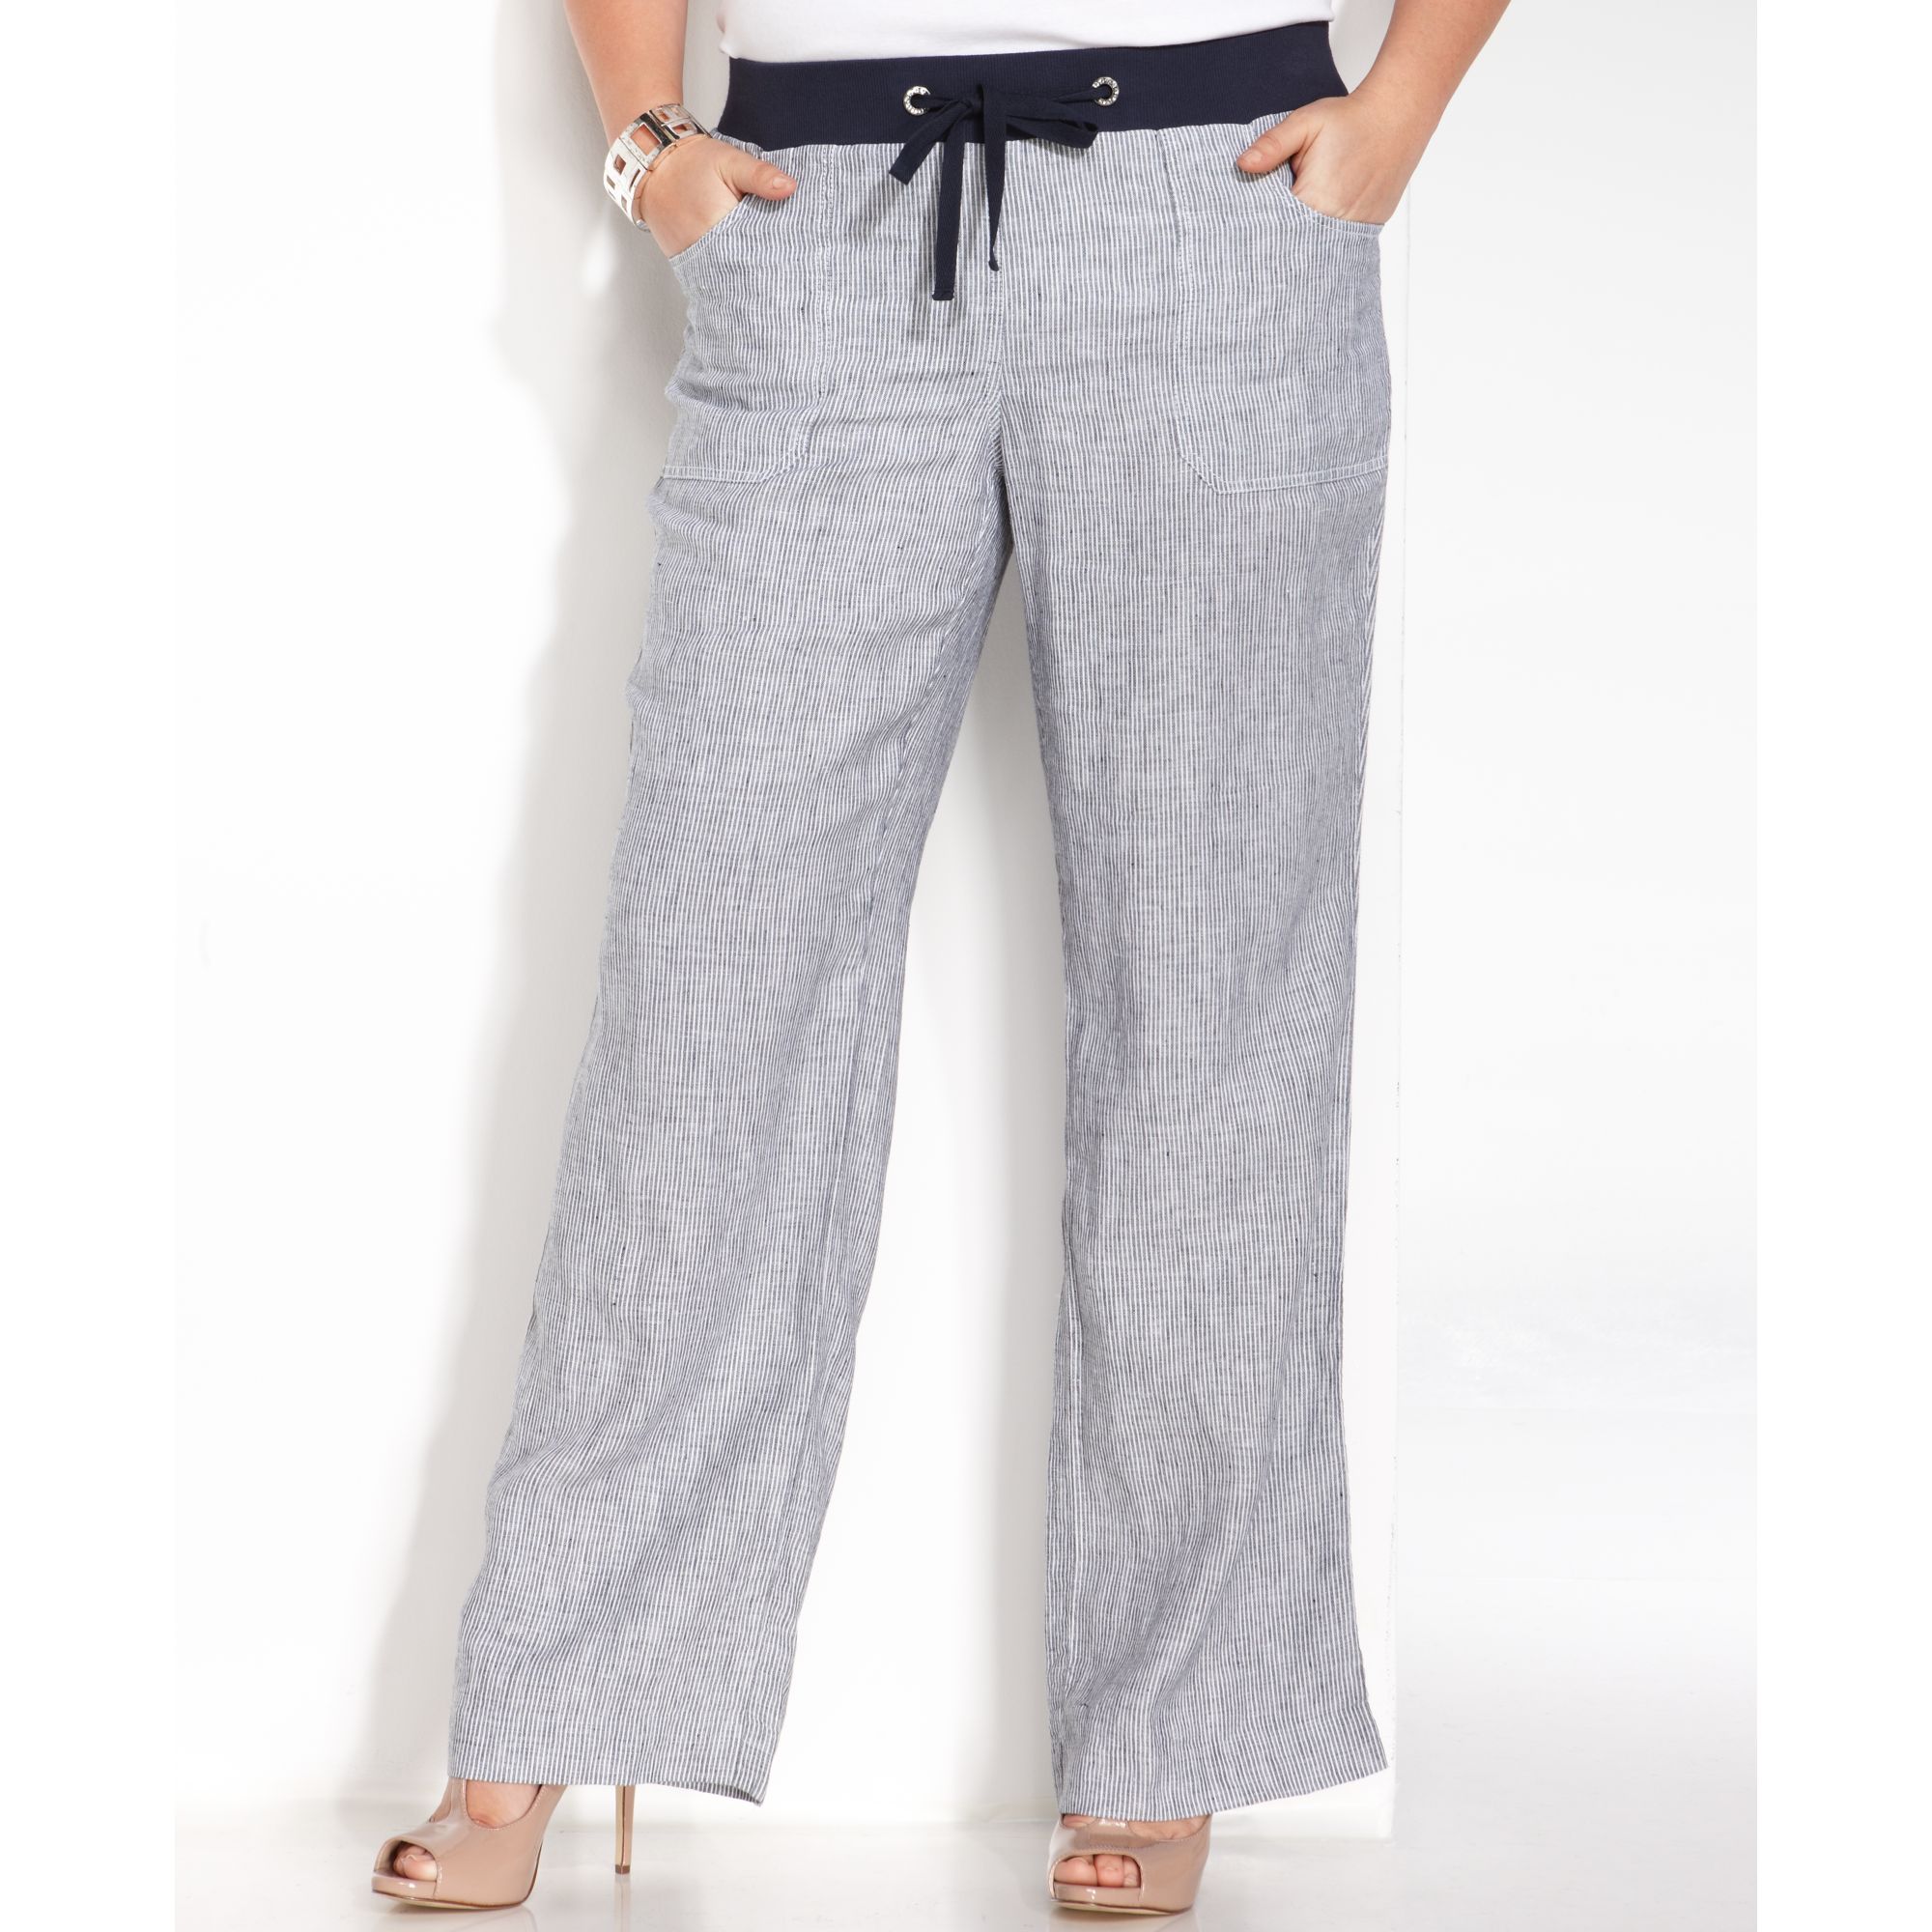 Inc international concepts Striped Linen Pants in Gray | Lyst